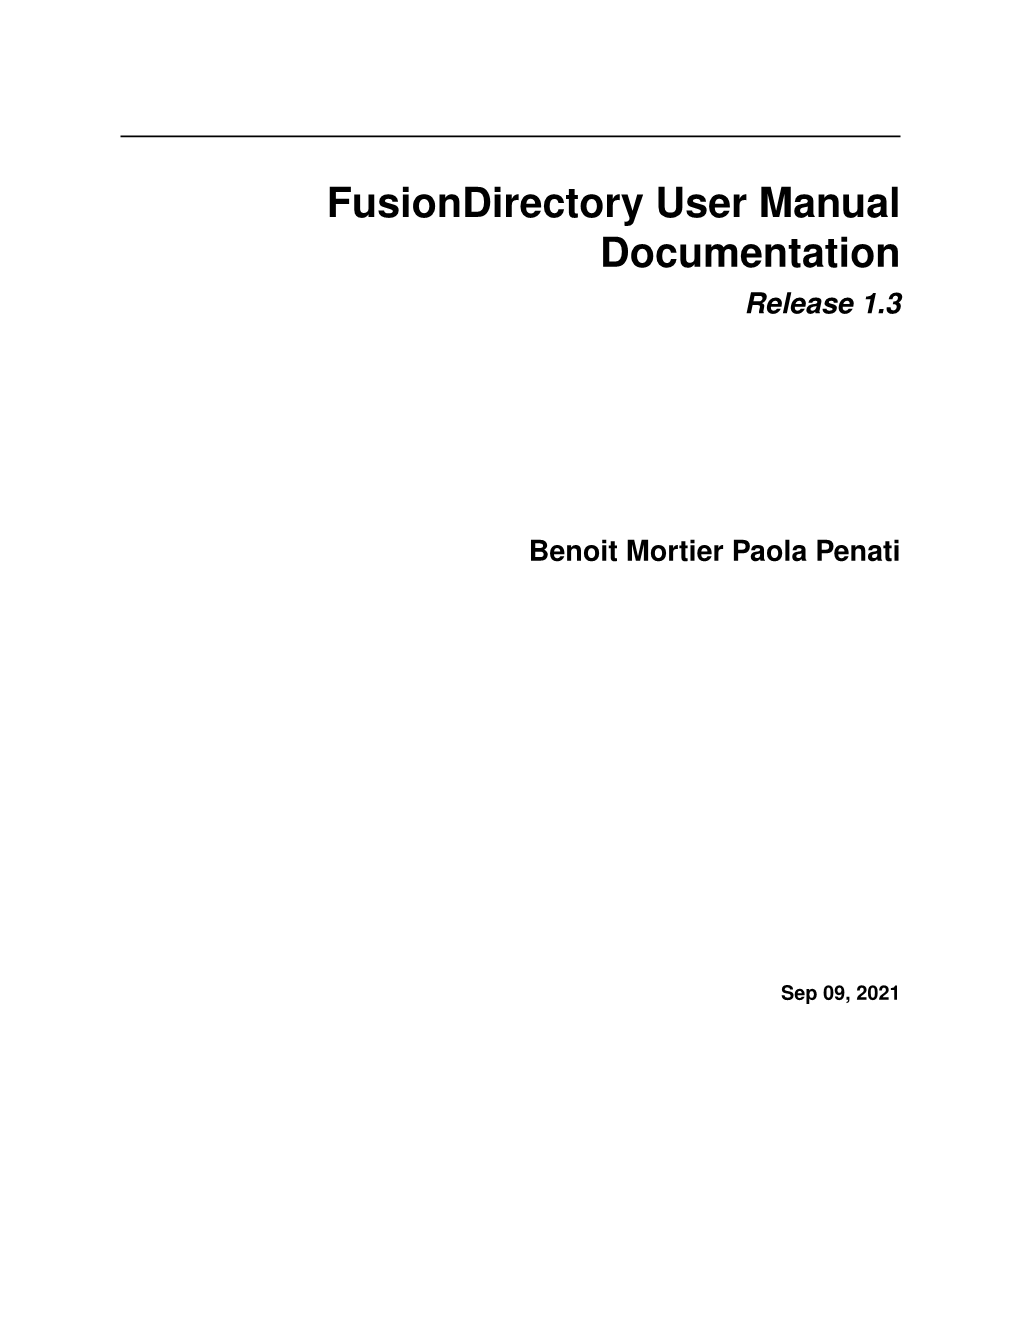 Fusiondirectory User Manual Documentation Release 1.3